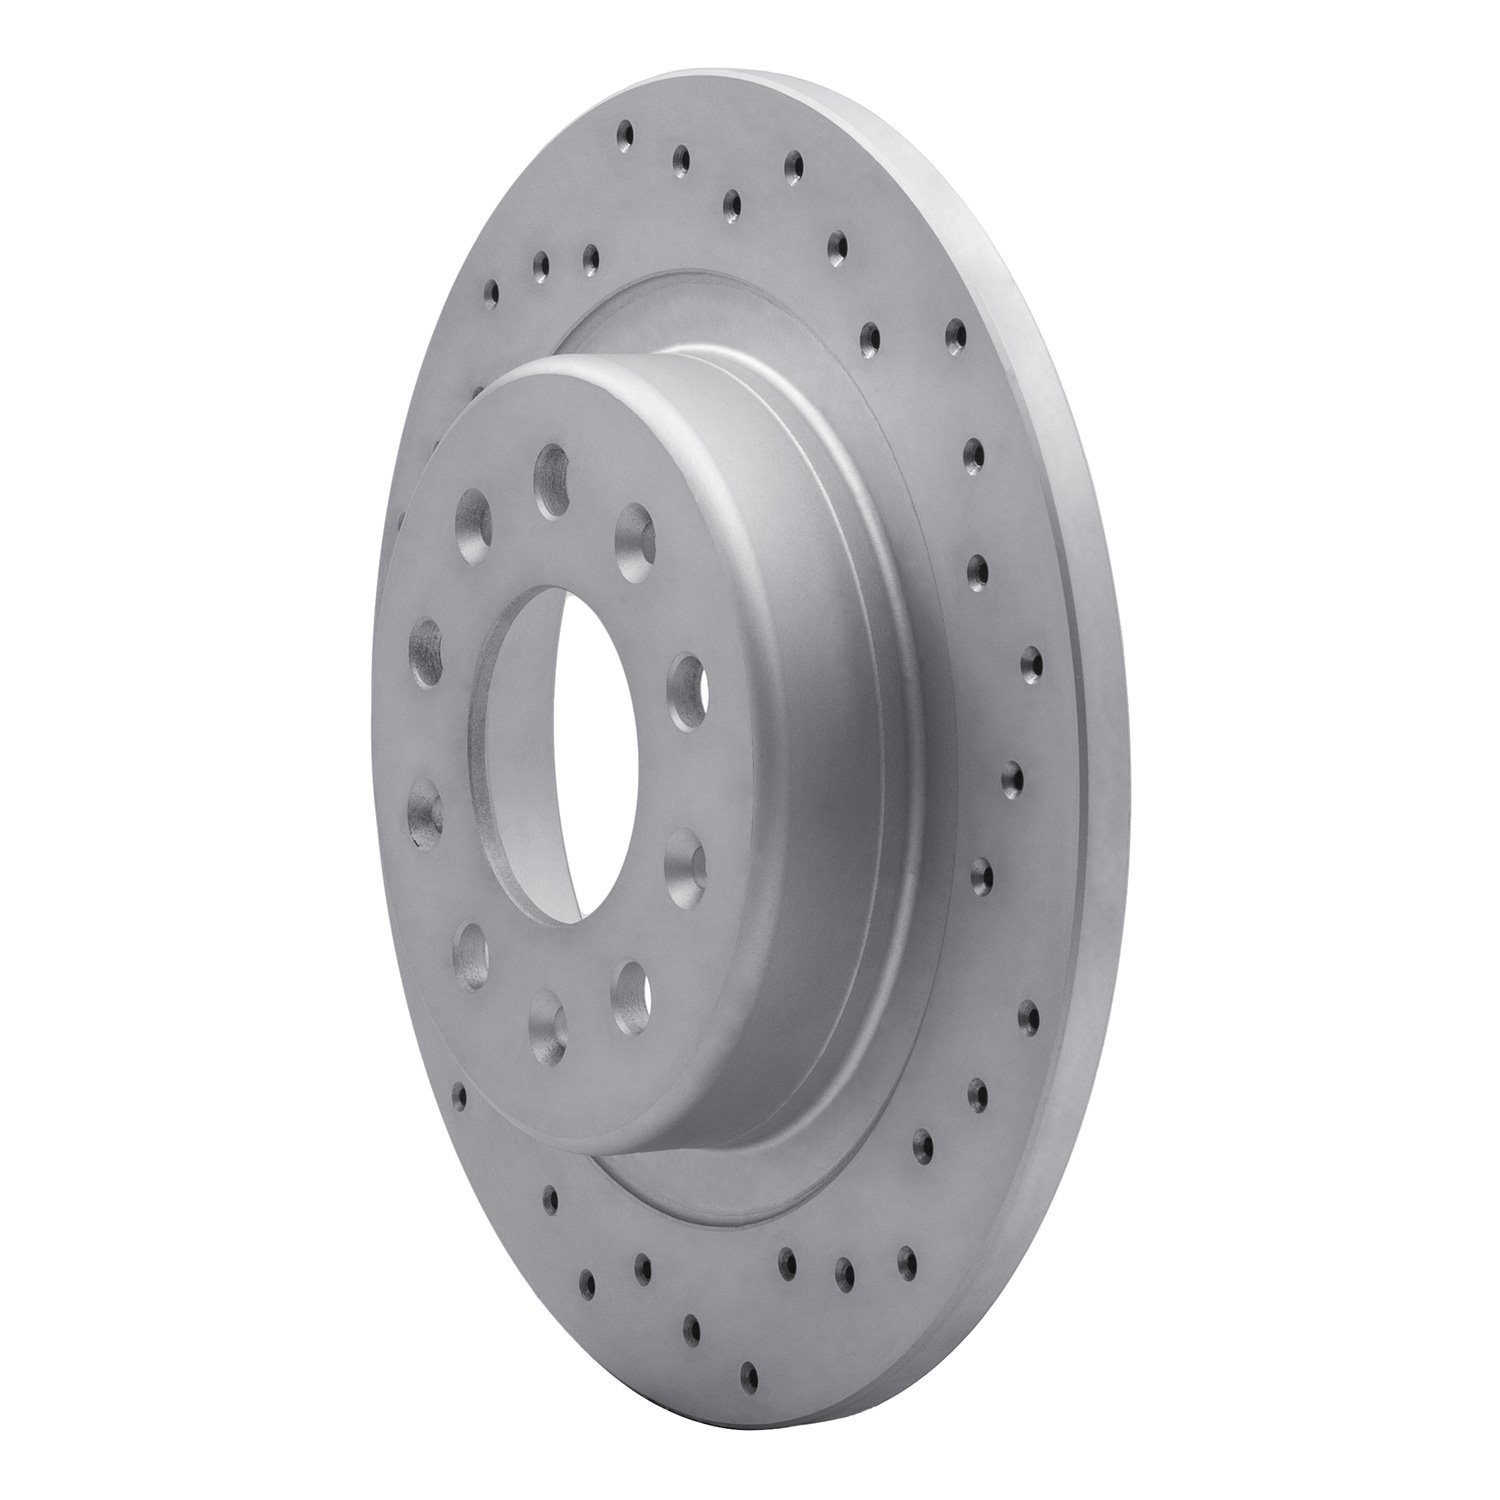 820-47075R Geoperformance Drilled Brake Rotor, Fits Select GM, Position: Rear Right